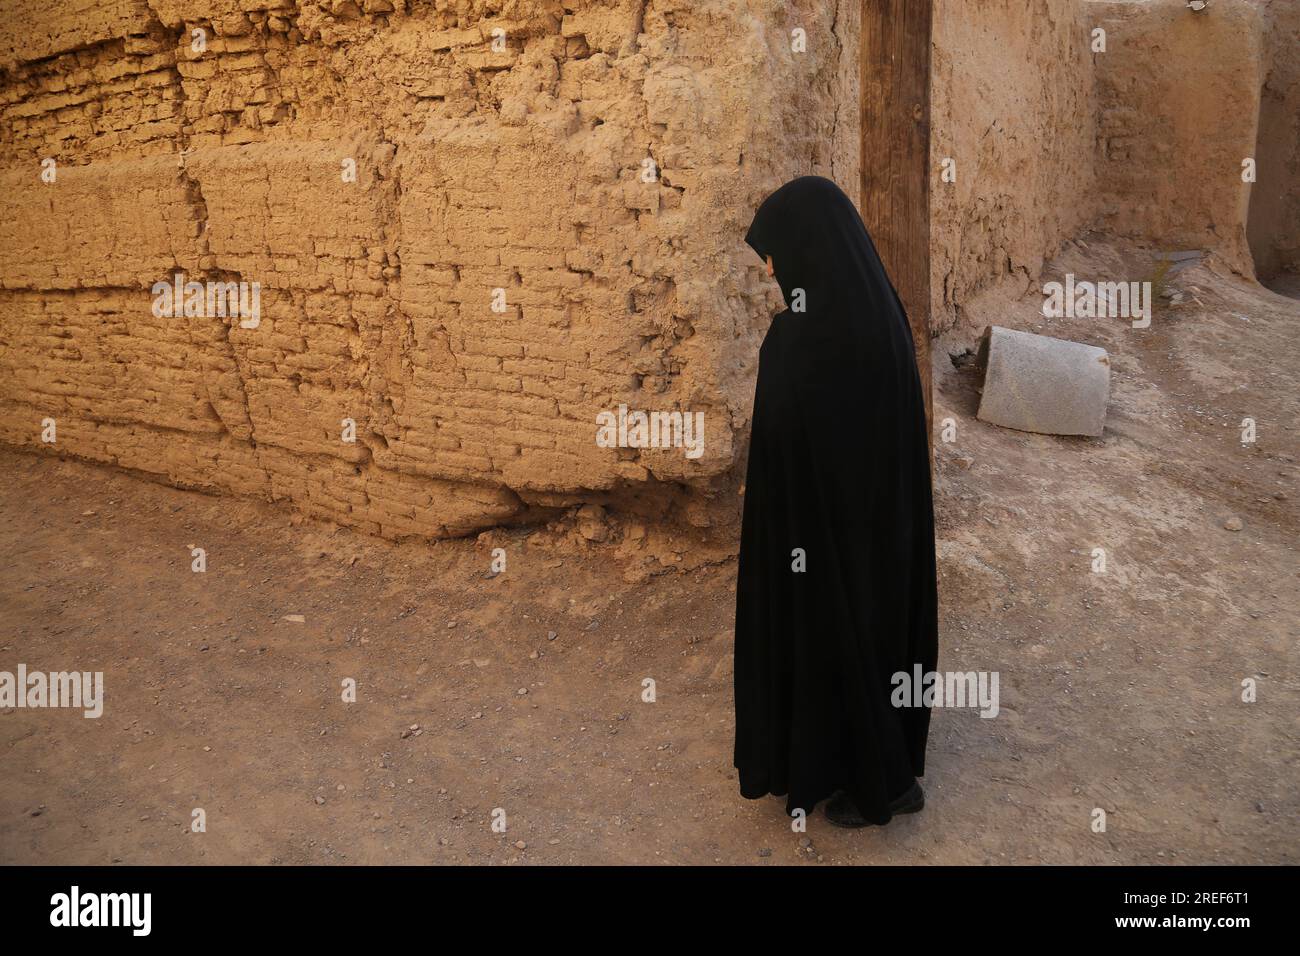 July 27, 2023, Qurtan village, Isfahan, Iran: An Iranian Shiite Muslim veiled woman walks before a religious ceremony marking the Muslim holy month of Muharram in the lead-up to Ashura in Qurtan village, near Isfahan. Ashura is a day of commemoration in Islam. It occurs annually on the 10th of Muharram, the first month of the Islamic calendar. Among Shia Muslims, Ashura is observed through large demonstrations of high-scale mourning as it marks the death of Husayn ibn Ali (a grandson of Muhammad), who was beheaded during the Battle of Karbala in 680 CE. (Credit Image: © Rouzbeh Fouladi/ZUMA Pr Stock Photo